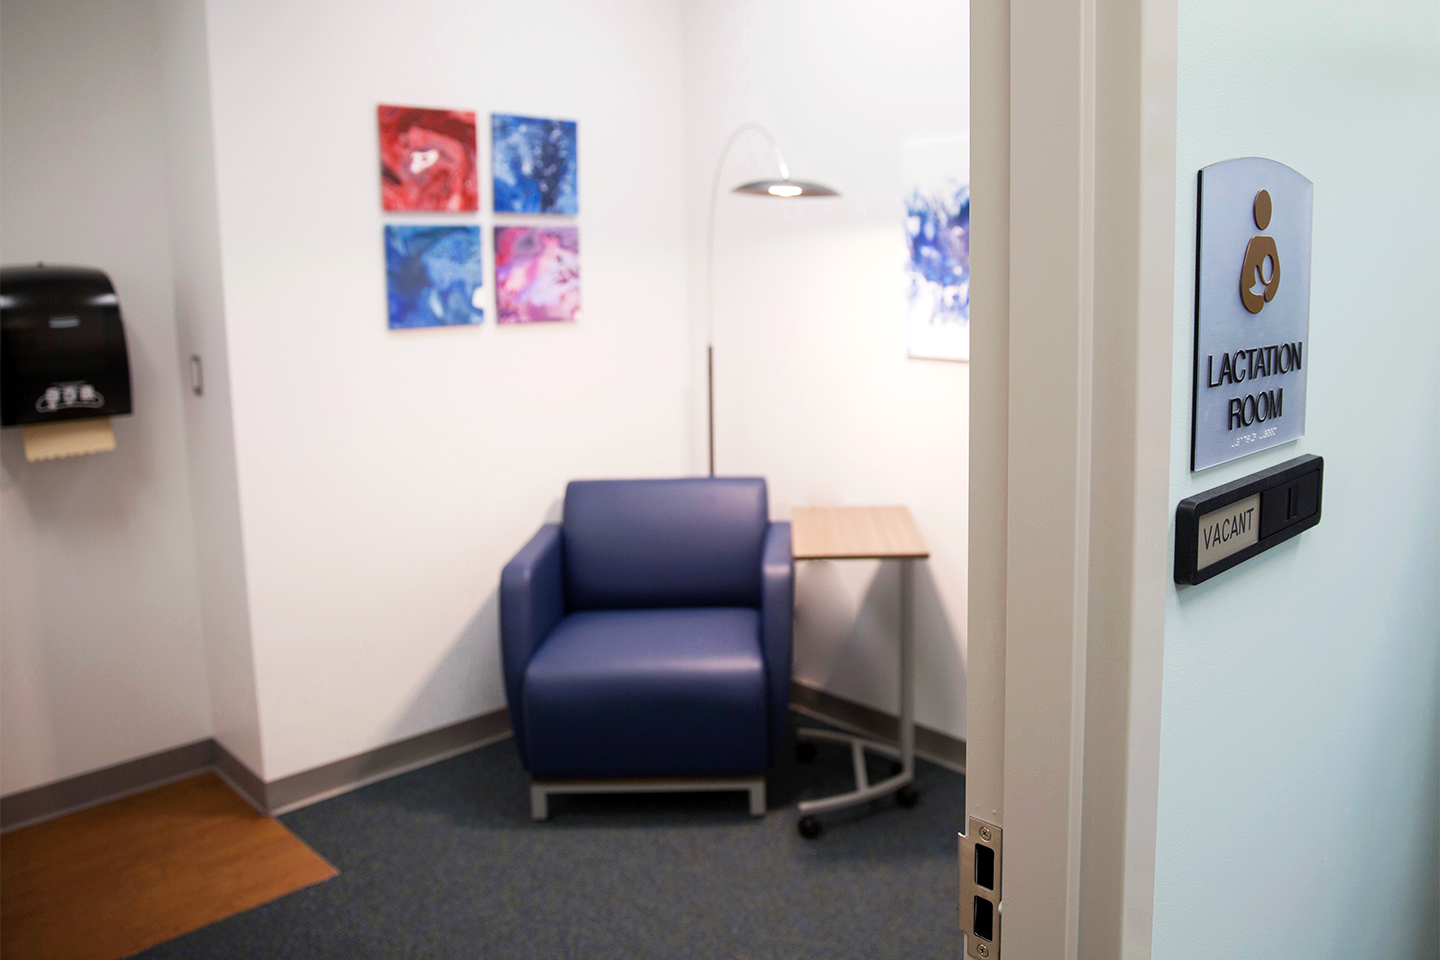 Lactation rooms available for parents in need at Oakland University